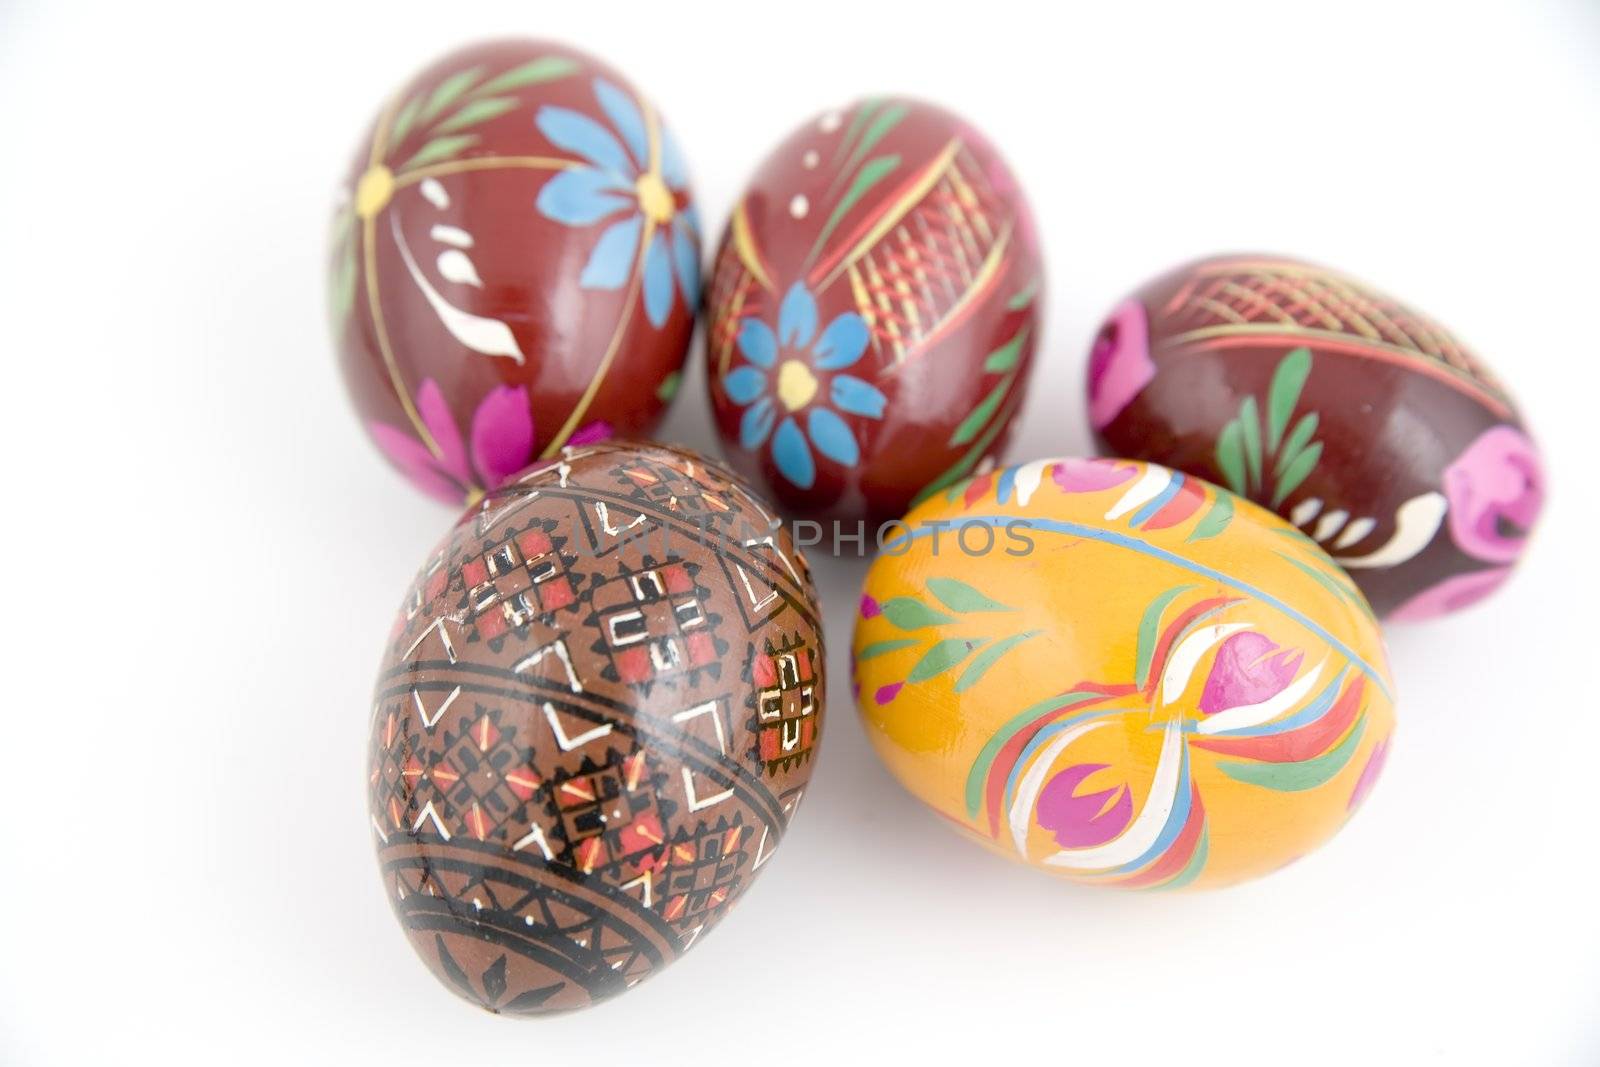 five painted eggs in basket on whie background